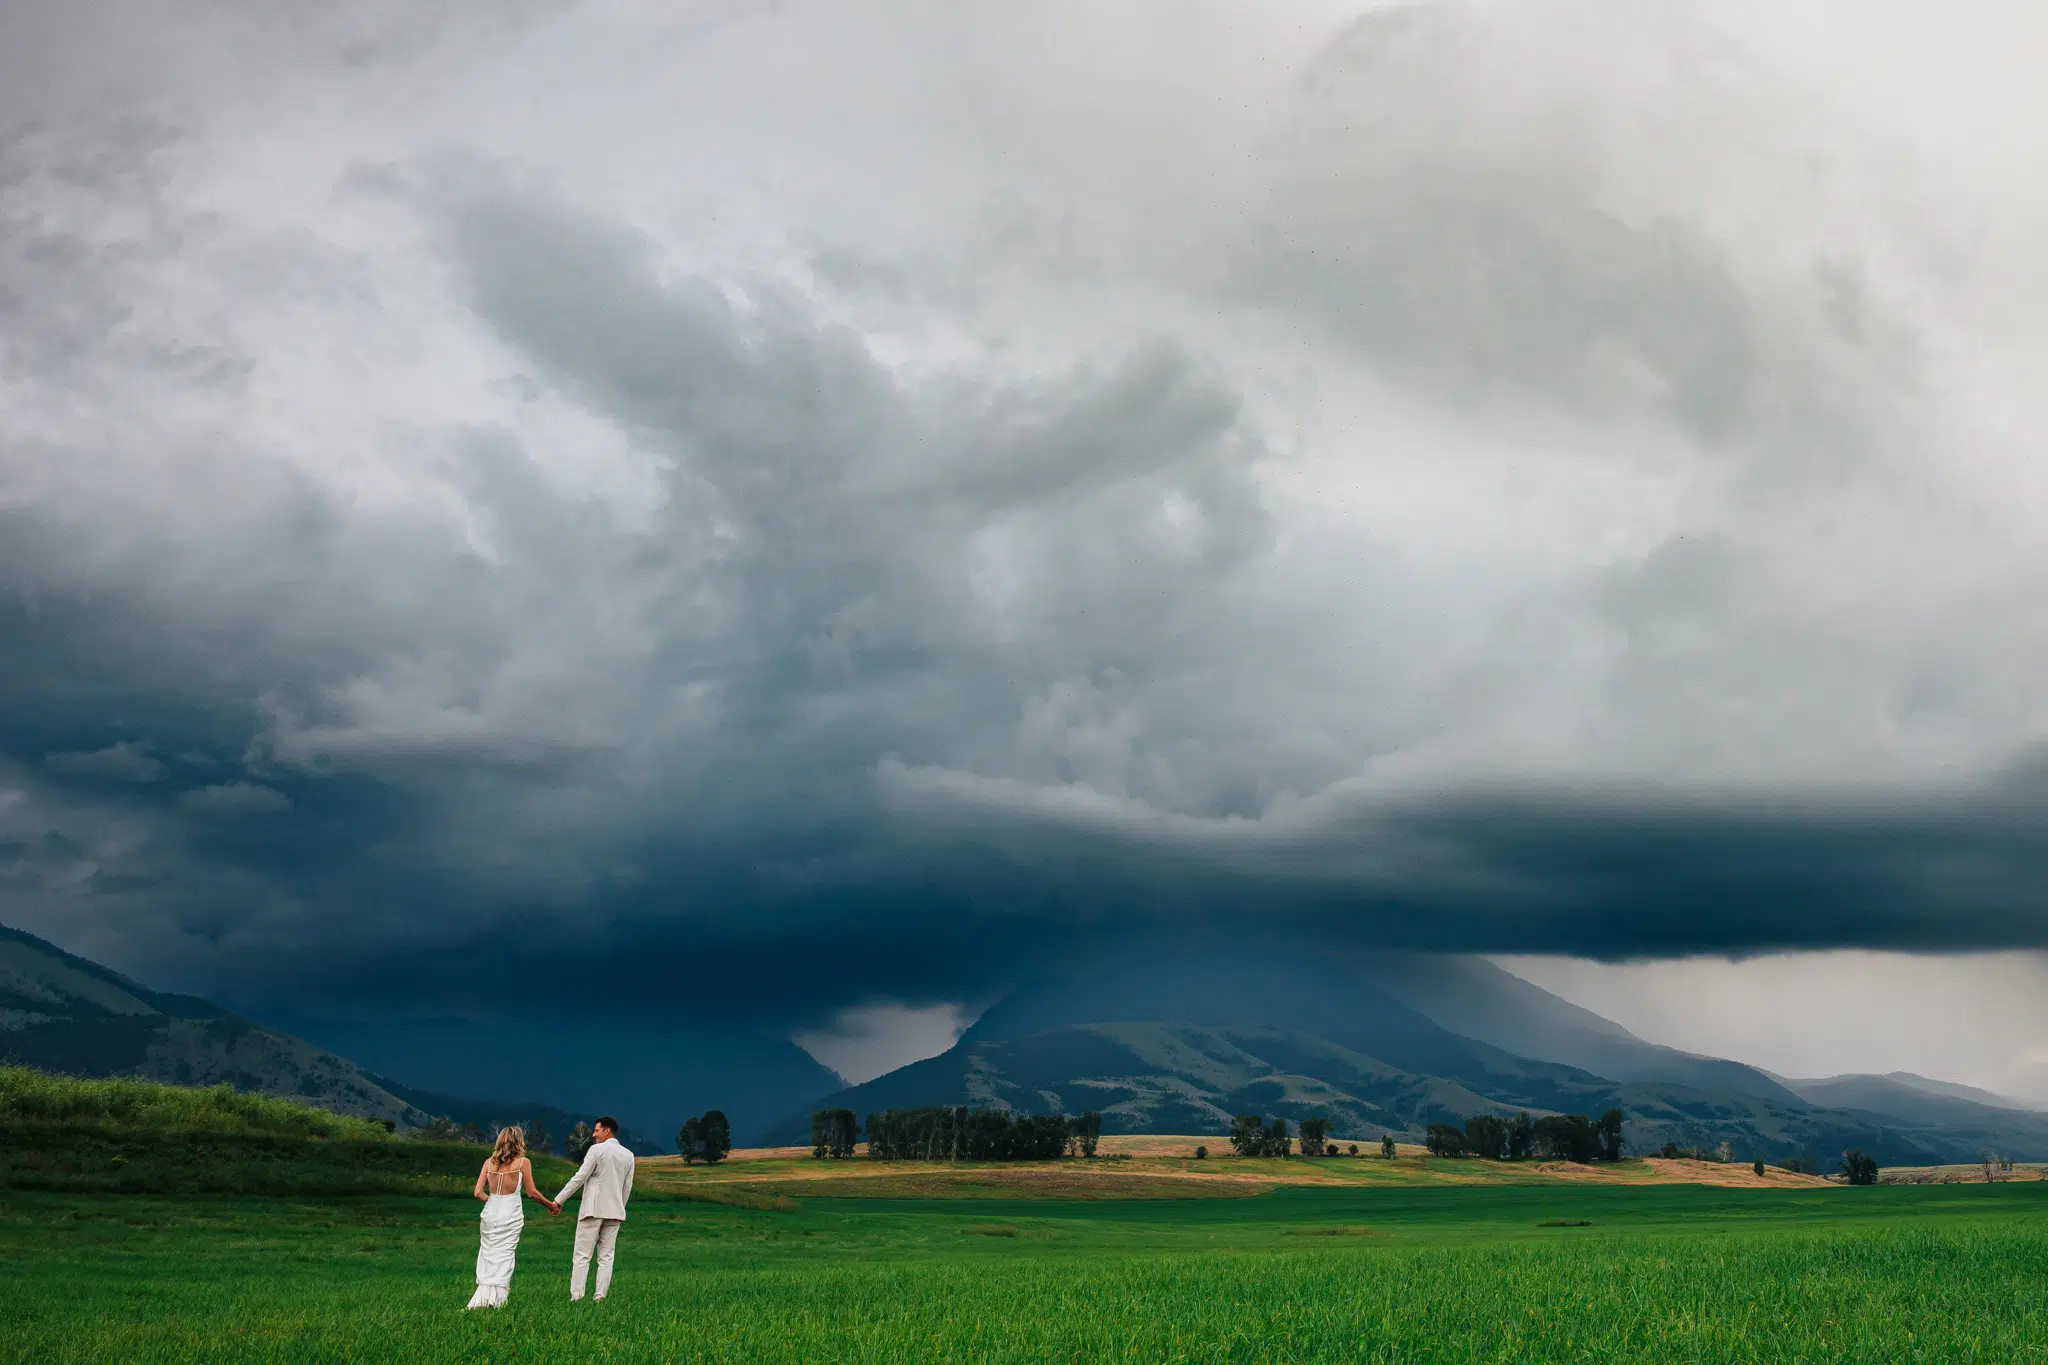 At Sage Lodge, A Couple Poses With A Dramatic Stormy Sky As Their Backdrop. Image Courtesy Of Charles Moll, A Premier Montana Elopement Photographer